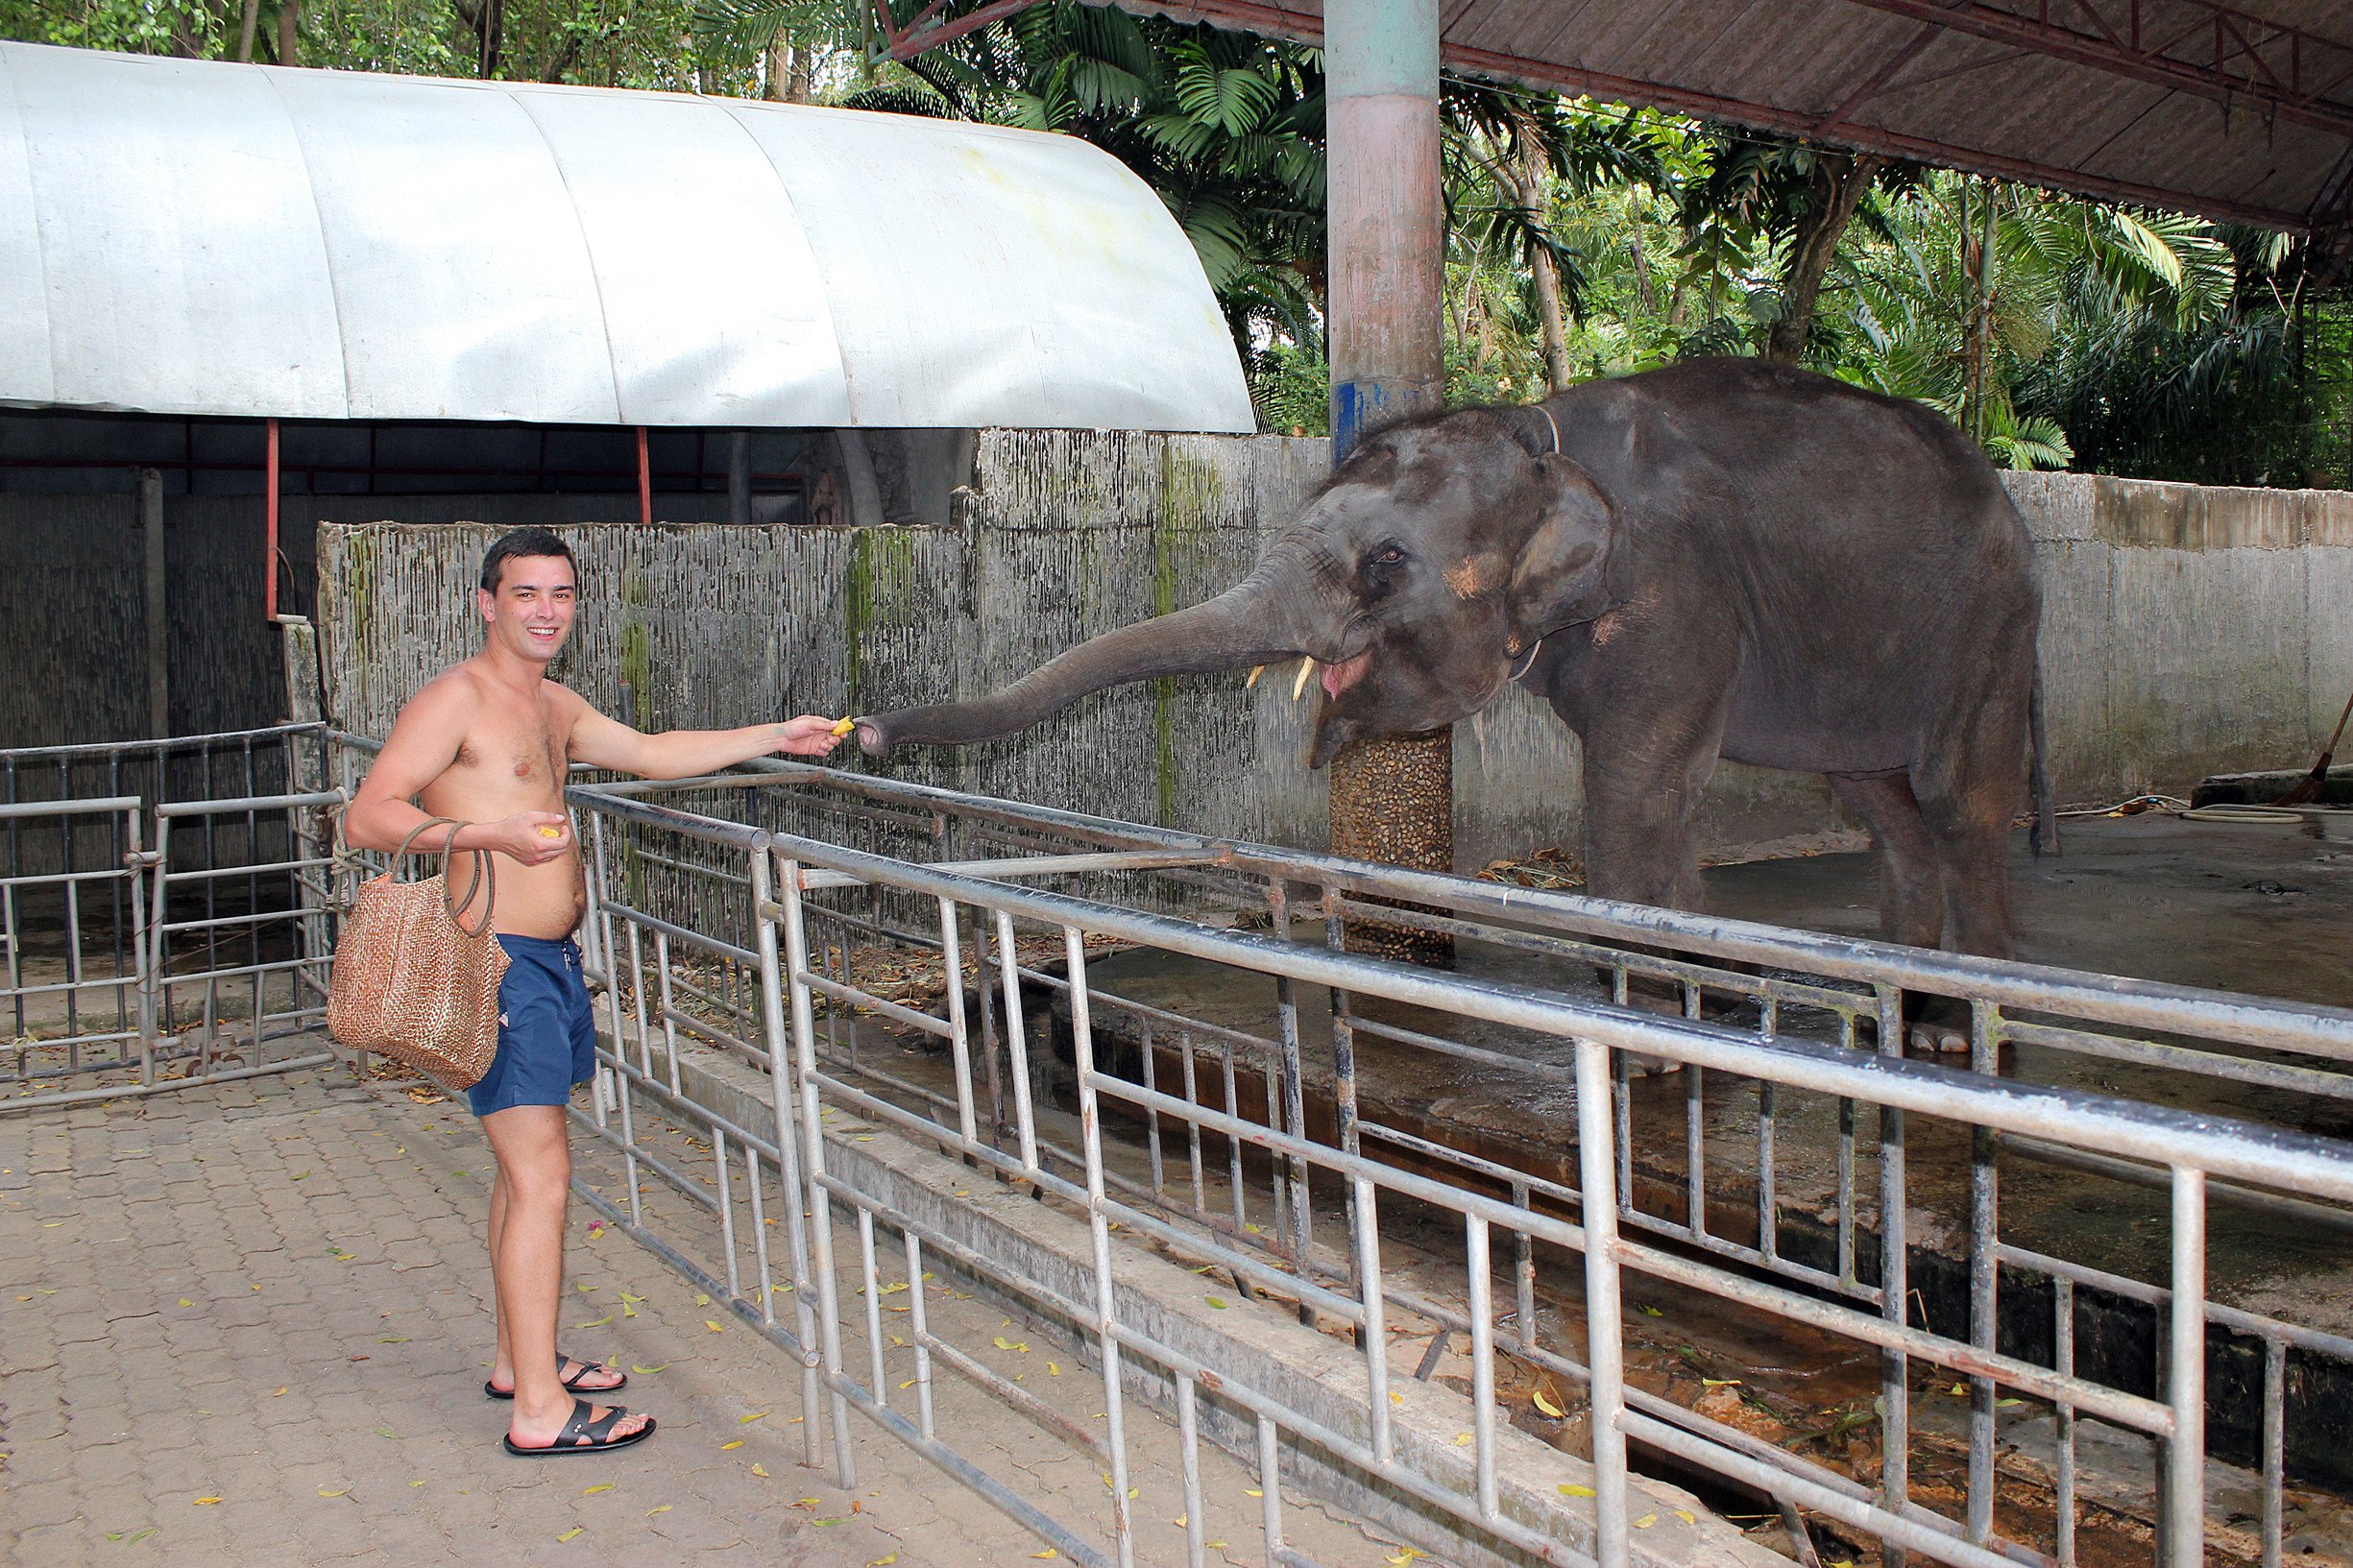 Hell on earth': Zoo in Thailand long accused of animal abuse finally  closes, but what will happen to the animals? | South China Morning Post